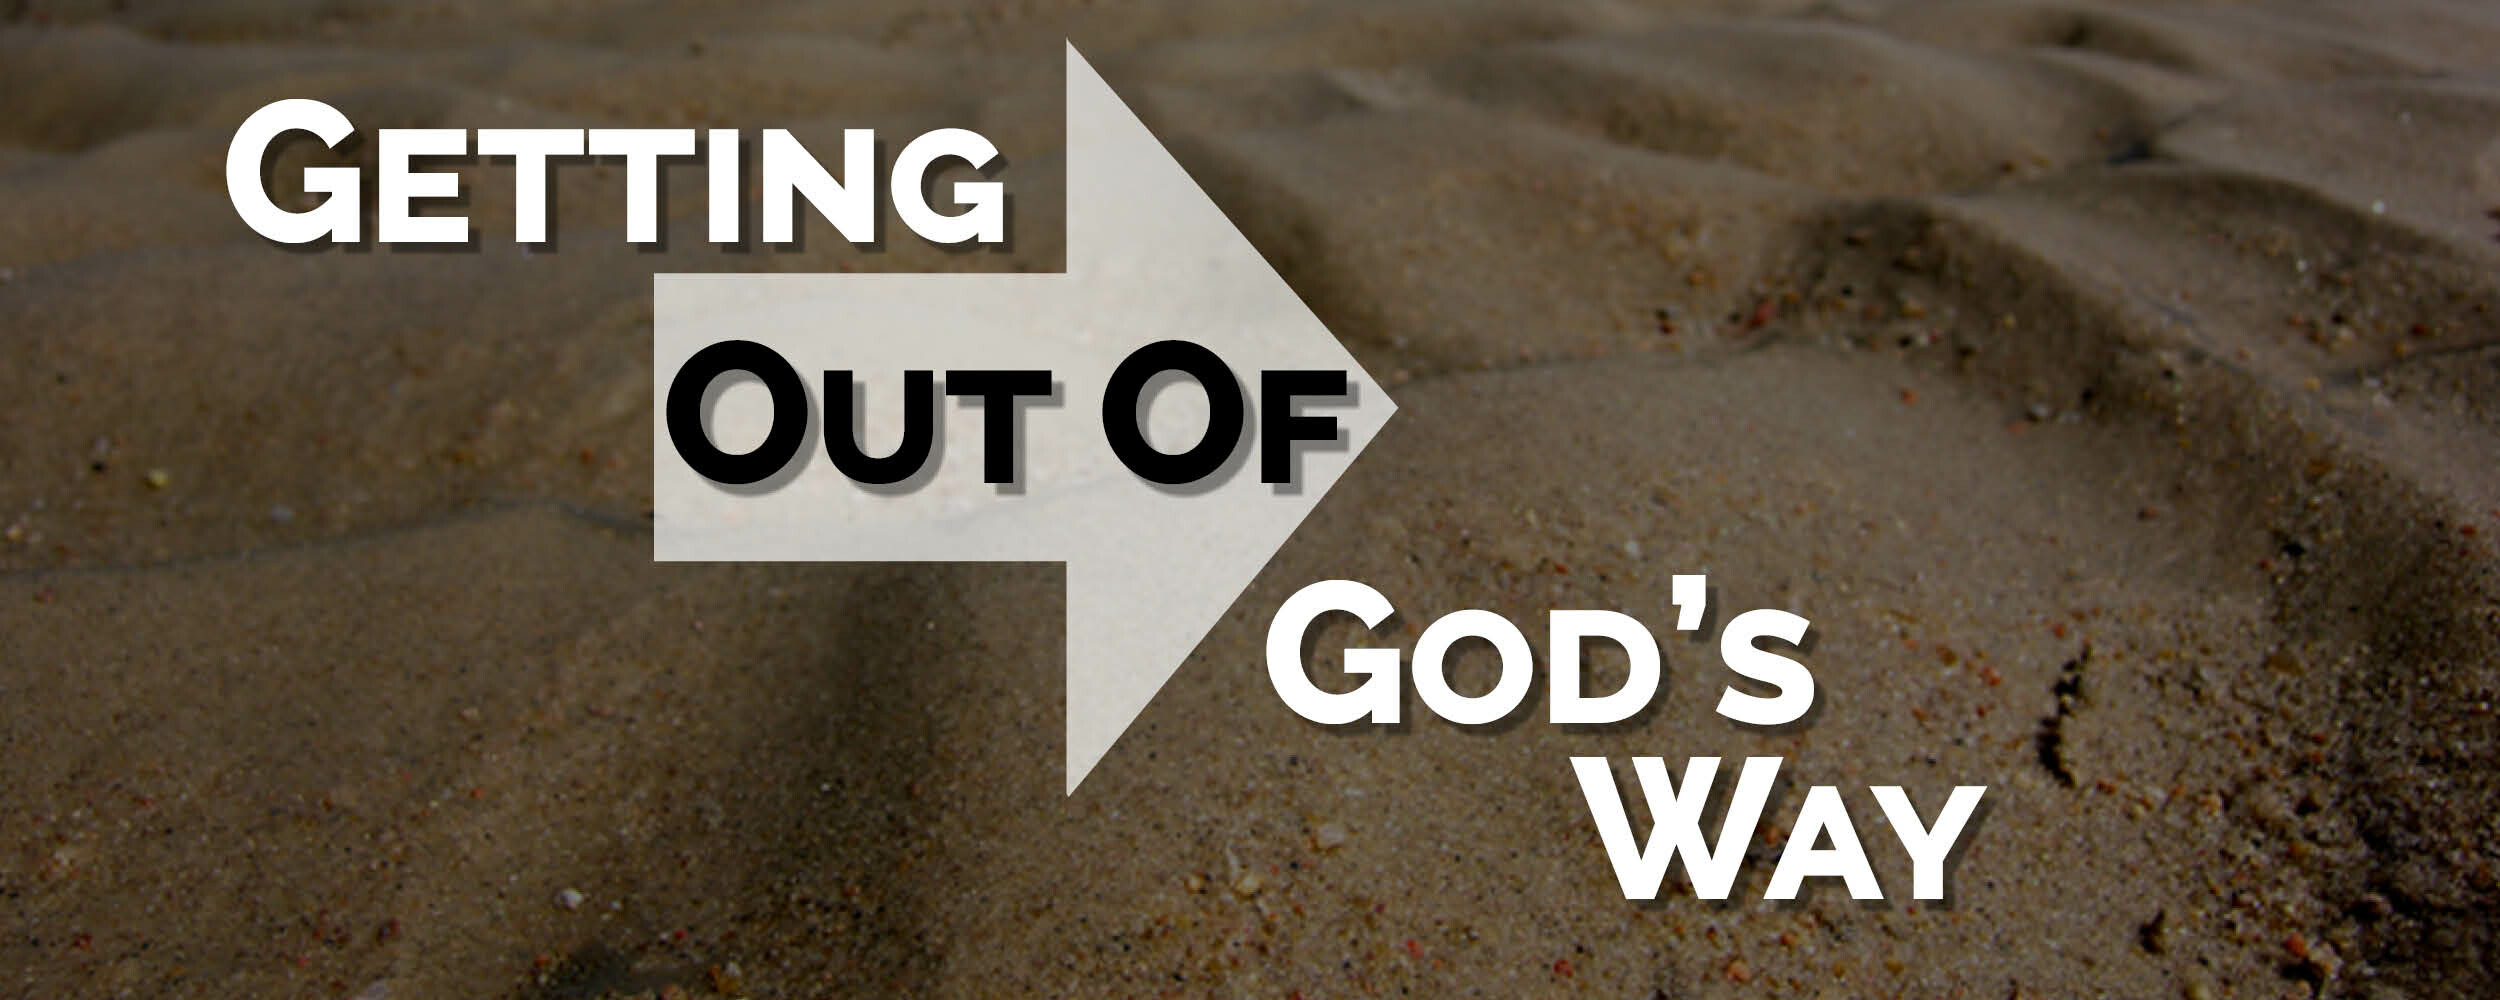 Getting Out of God's Way